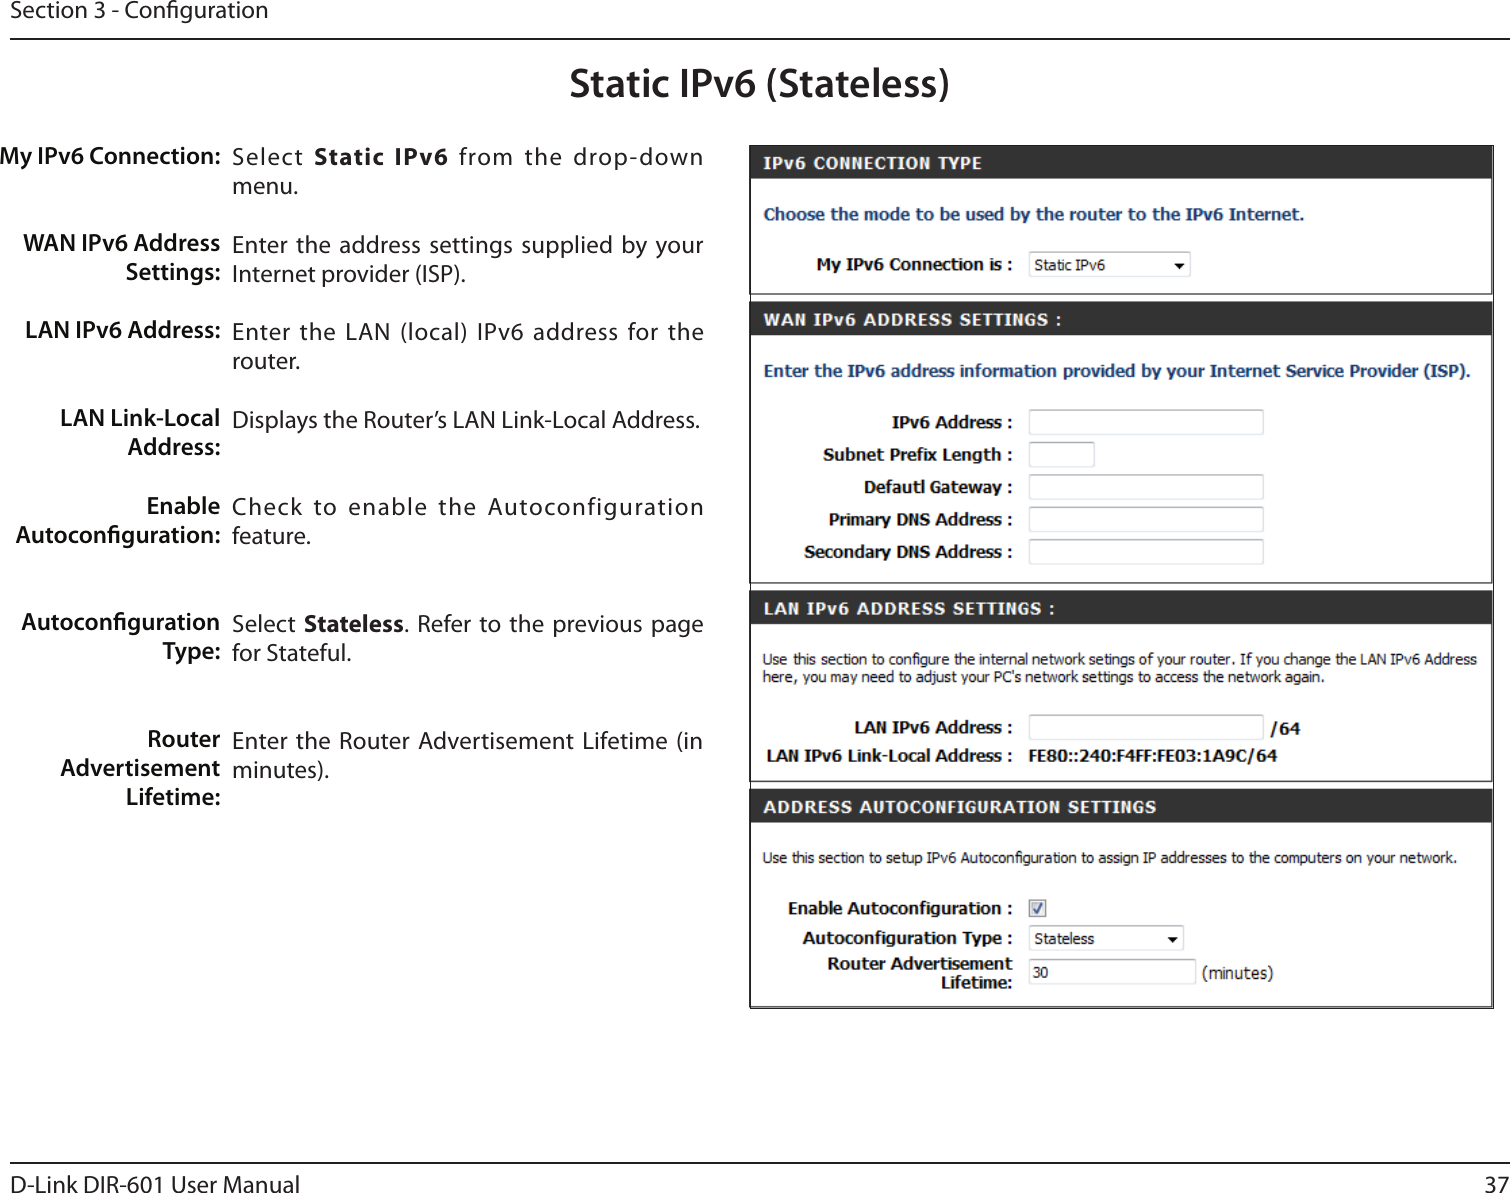 37D-Link DIR-601 User ManualSection 3 - CongurationStatic IPv6 (Stateless)Select  Static IPv6  from  the  drop-down menu.Enter the address settings supplied by your Internet provider (ISP). Enter the LAN (local)  IPv6 address for the router. Displays the Router’s LAN Link-Local Address.Check  to  enable  the  Autoconfiguration feature.Select  Stateless.  Refer to the previous page for Stateful.Enter the Router Advertisement Lifetime (in minutes).My IPv6 Connection:WAN IPv6 Address Settings:LAN IPv6 Address:LAN Link-Local Address:Enable Autoconguration:Autoconguration Type:Router Advertisement  Lifetime: